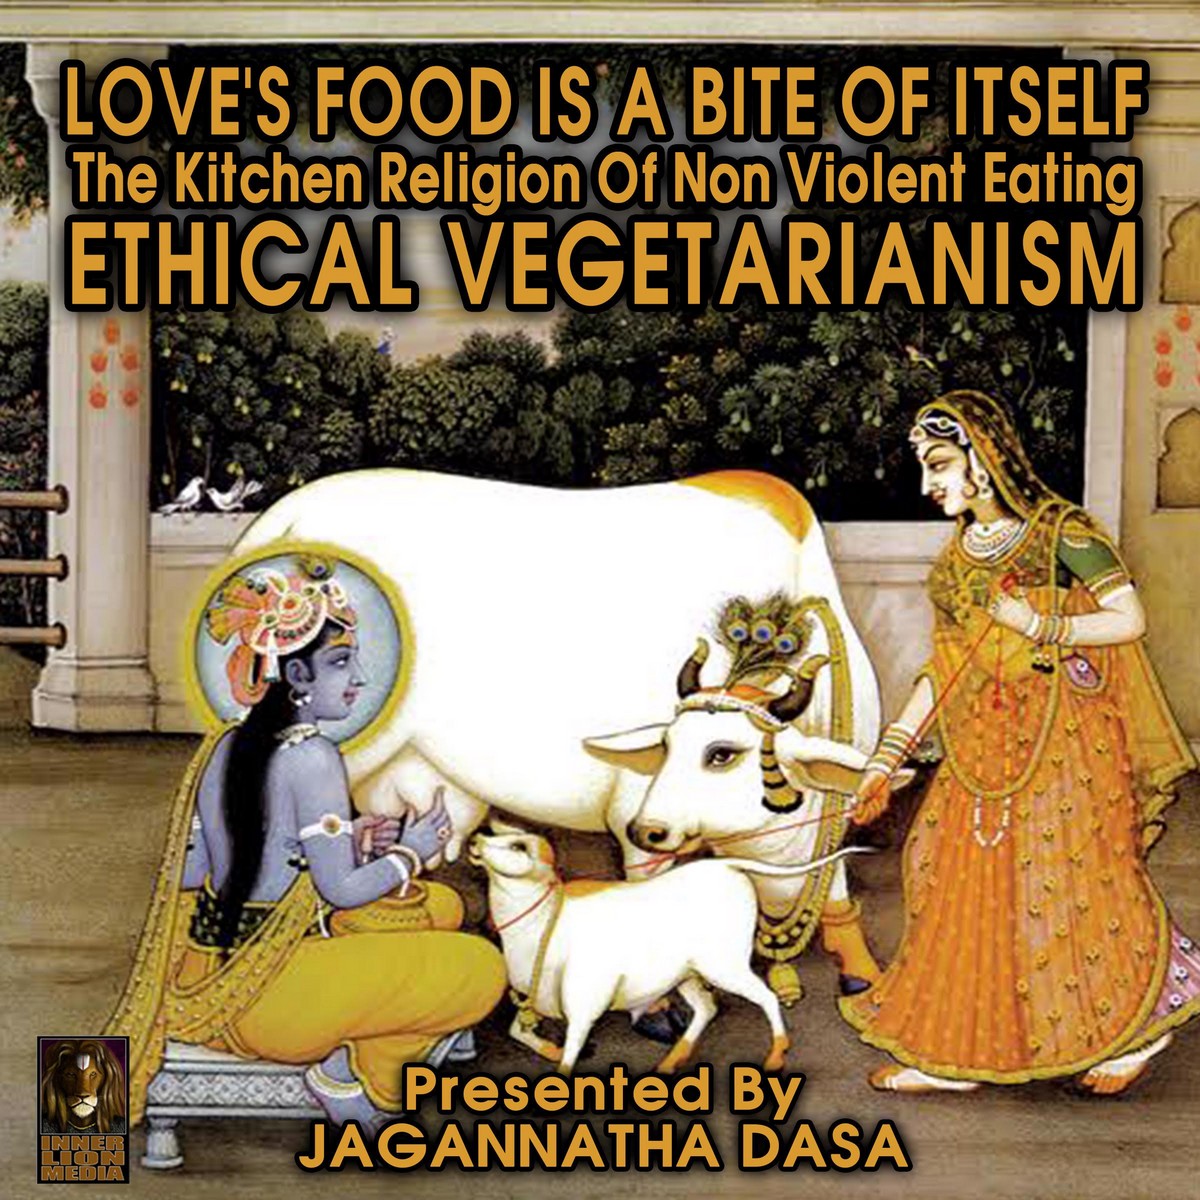 Love’s Food is a Bite of Itself; The Kitchen Religion of Non-Violent Eating; Ethical Vegetarianism